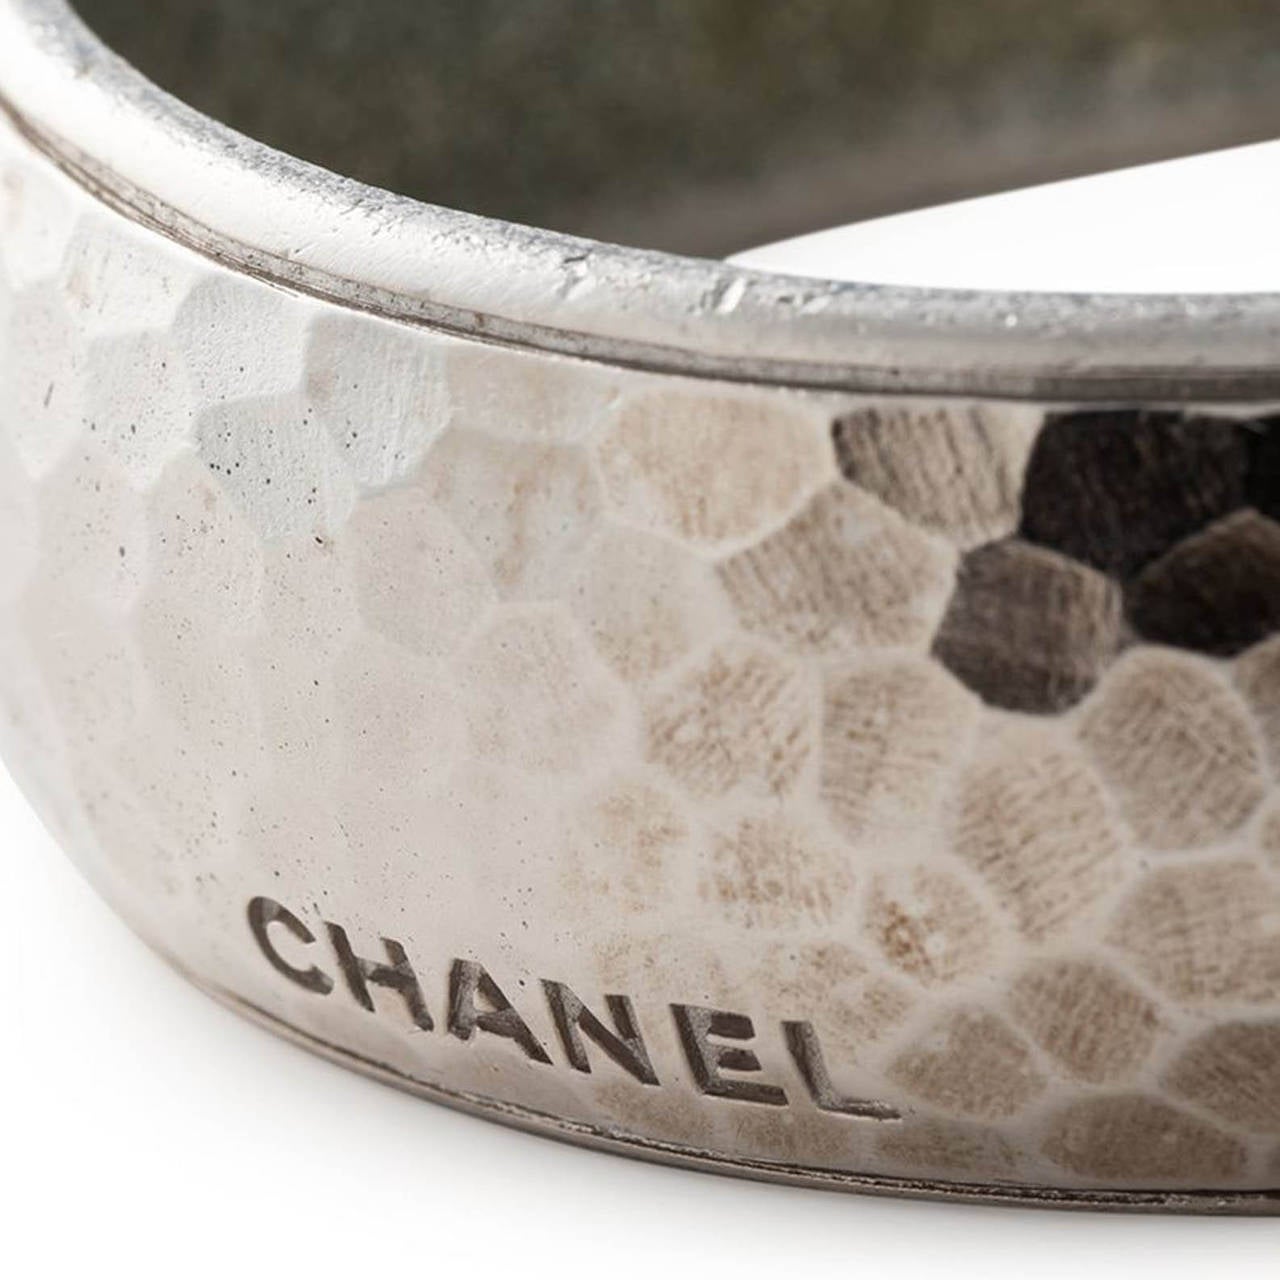 This silver-tone textured bangle from Chanel features an internal logo plaque and an engraved front logo.

Measurements: Width: 2.5 cm, Circumference: 20.5 cm

Material: Metal

Colour: Silver